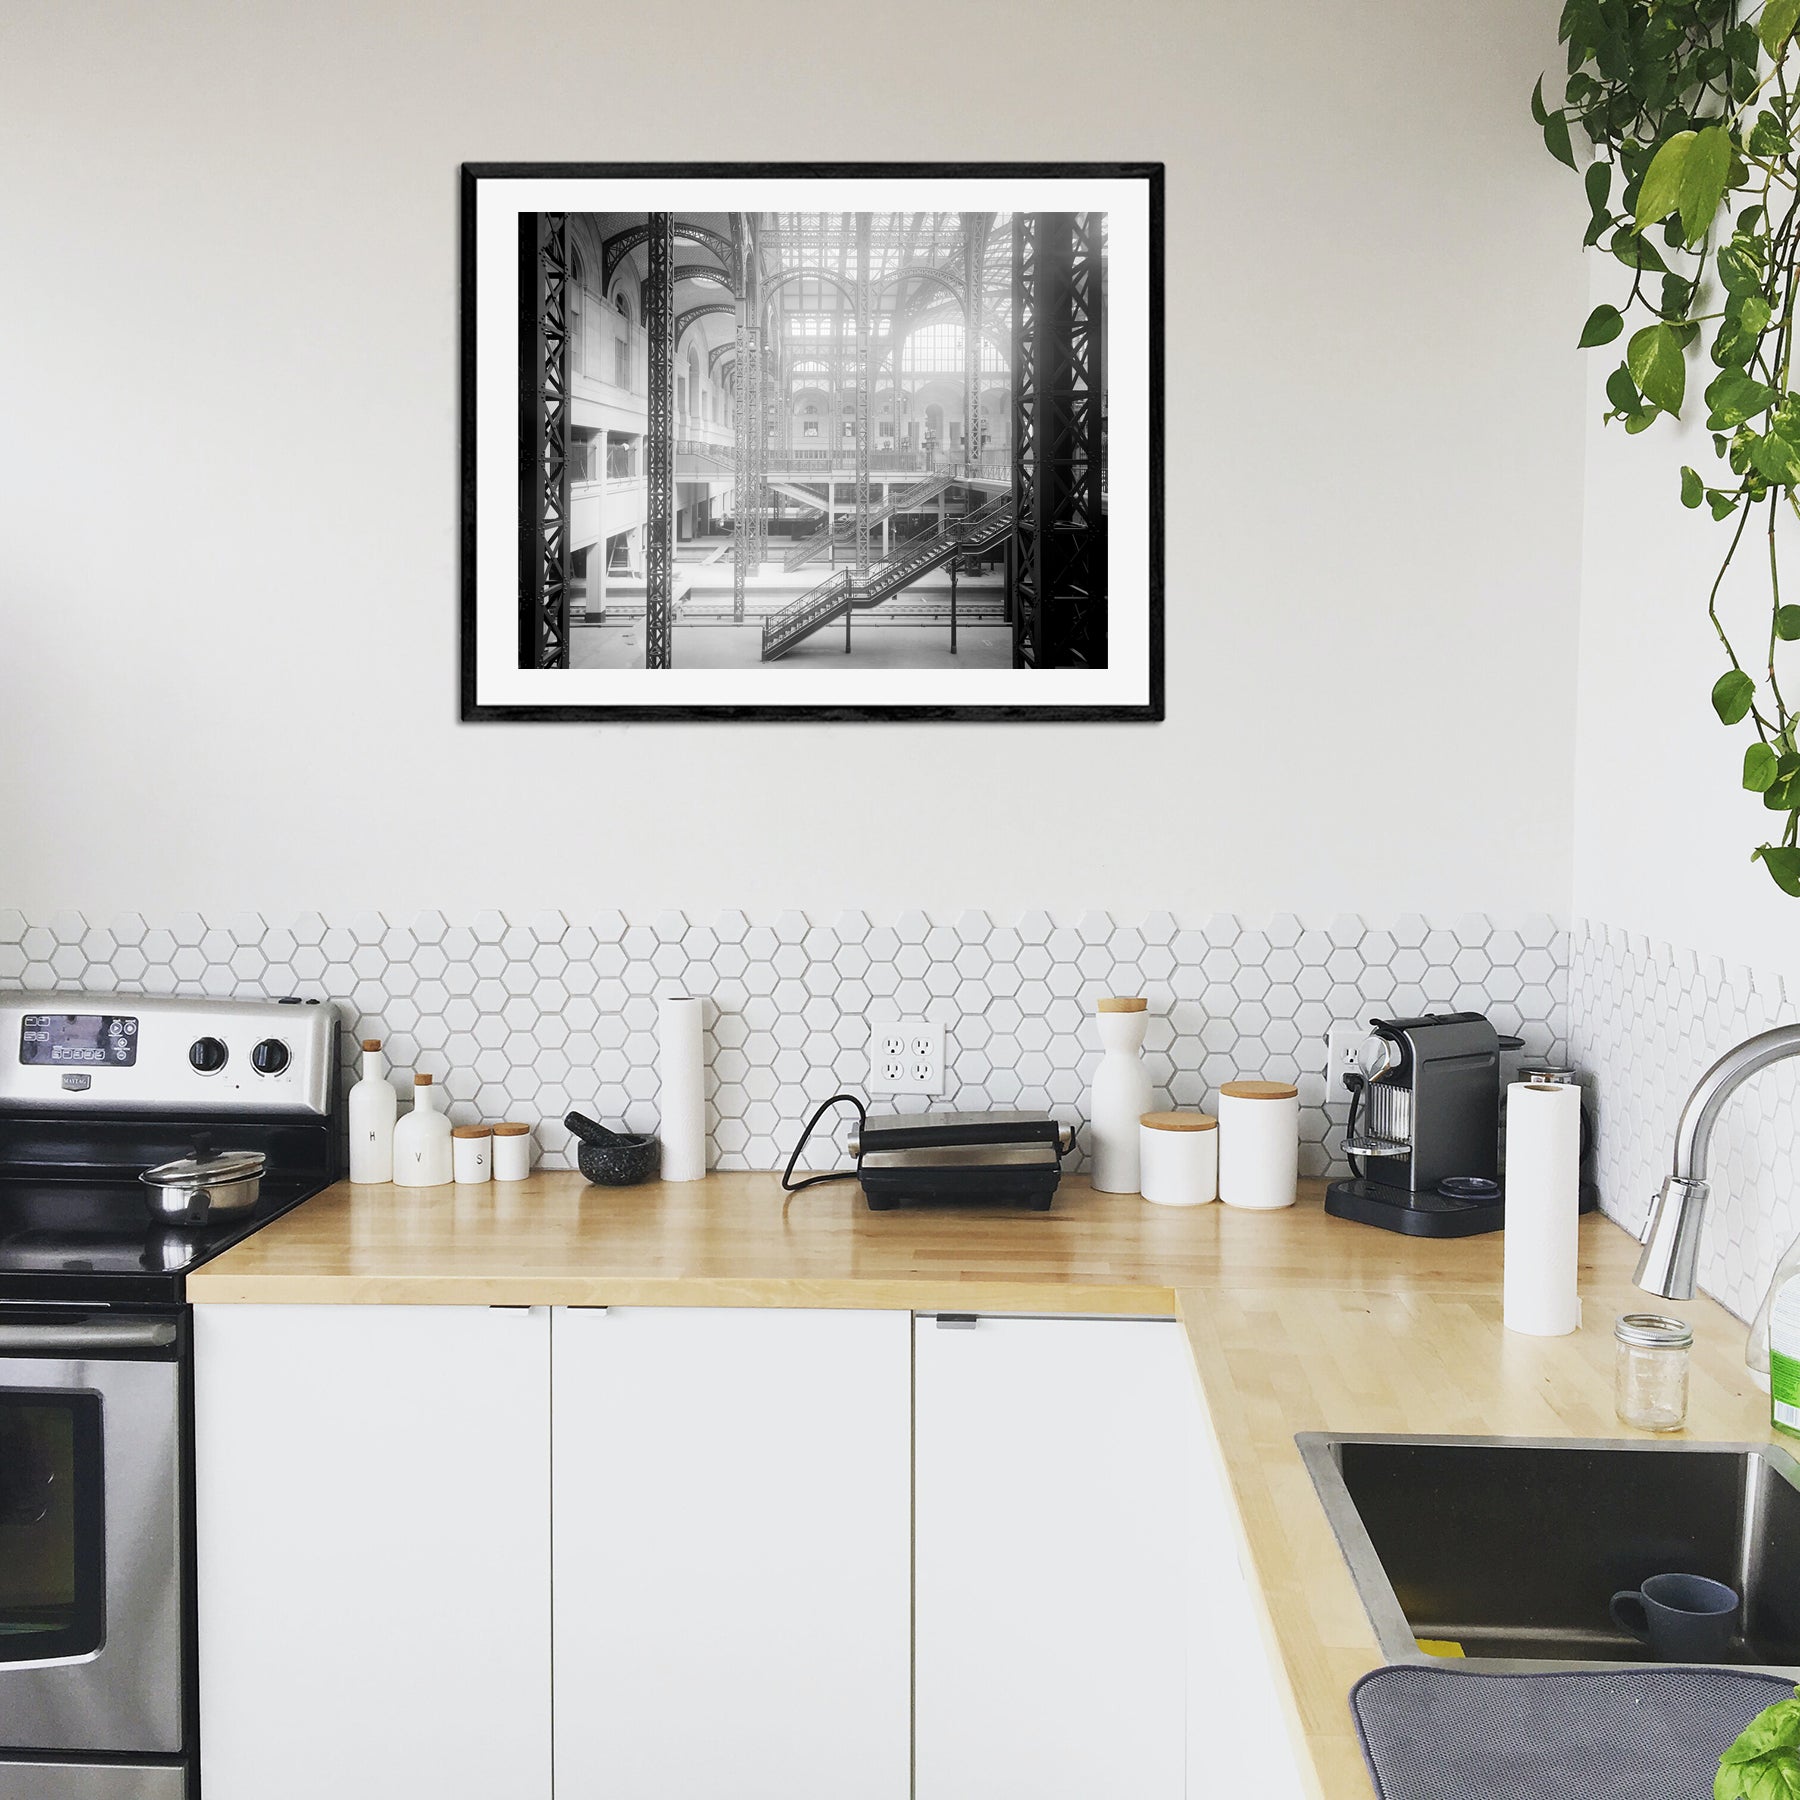 A framed print of a black and white photograph of Penn Station hanging in a modern kitchen